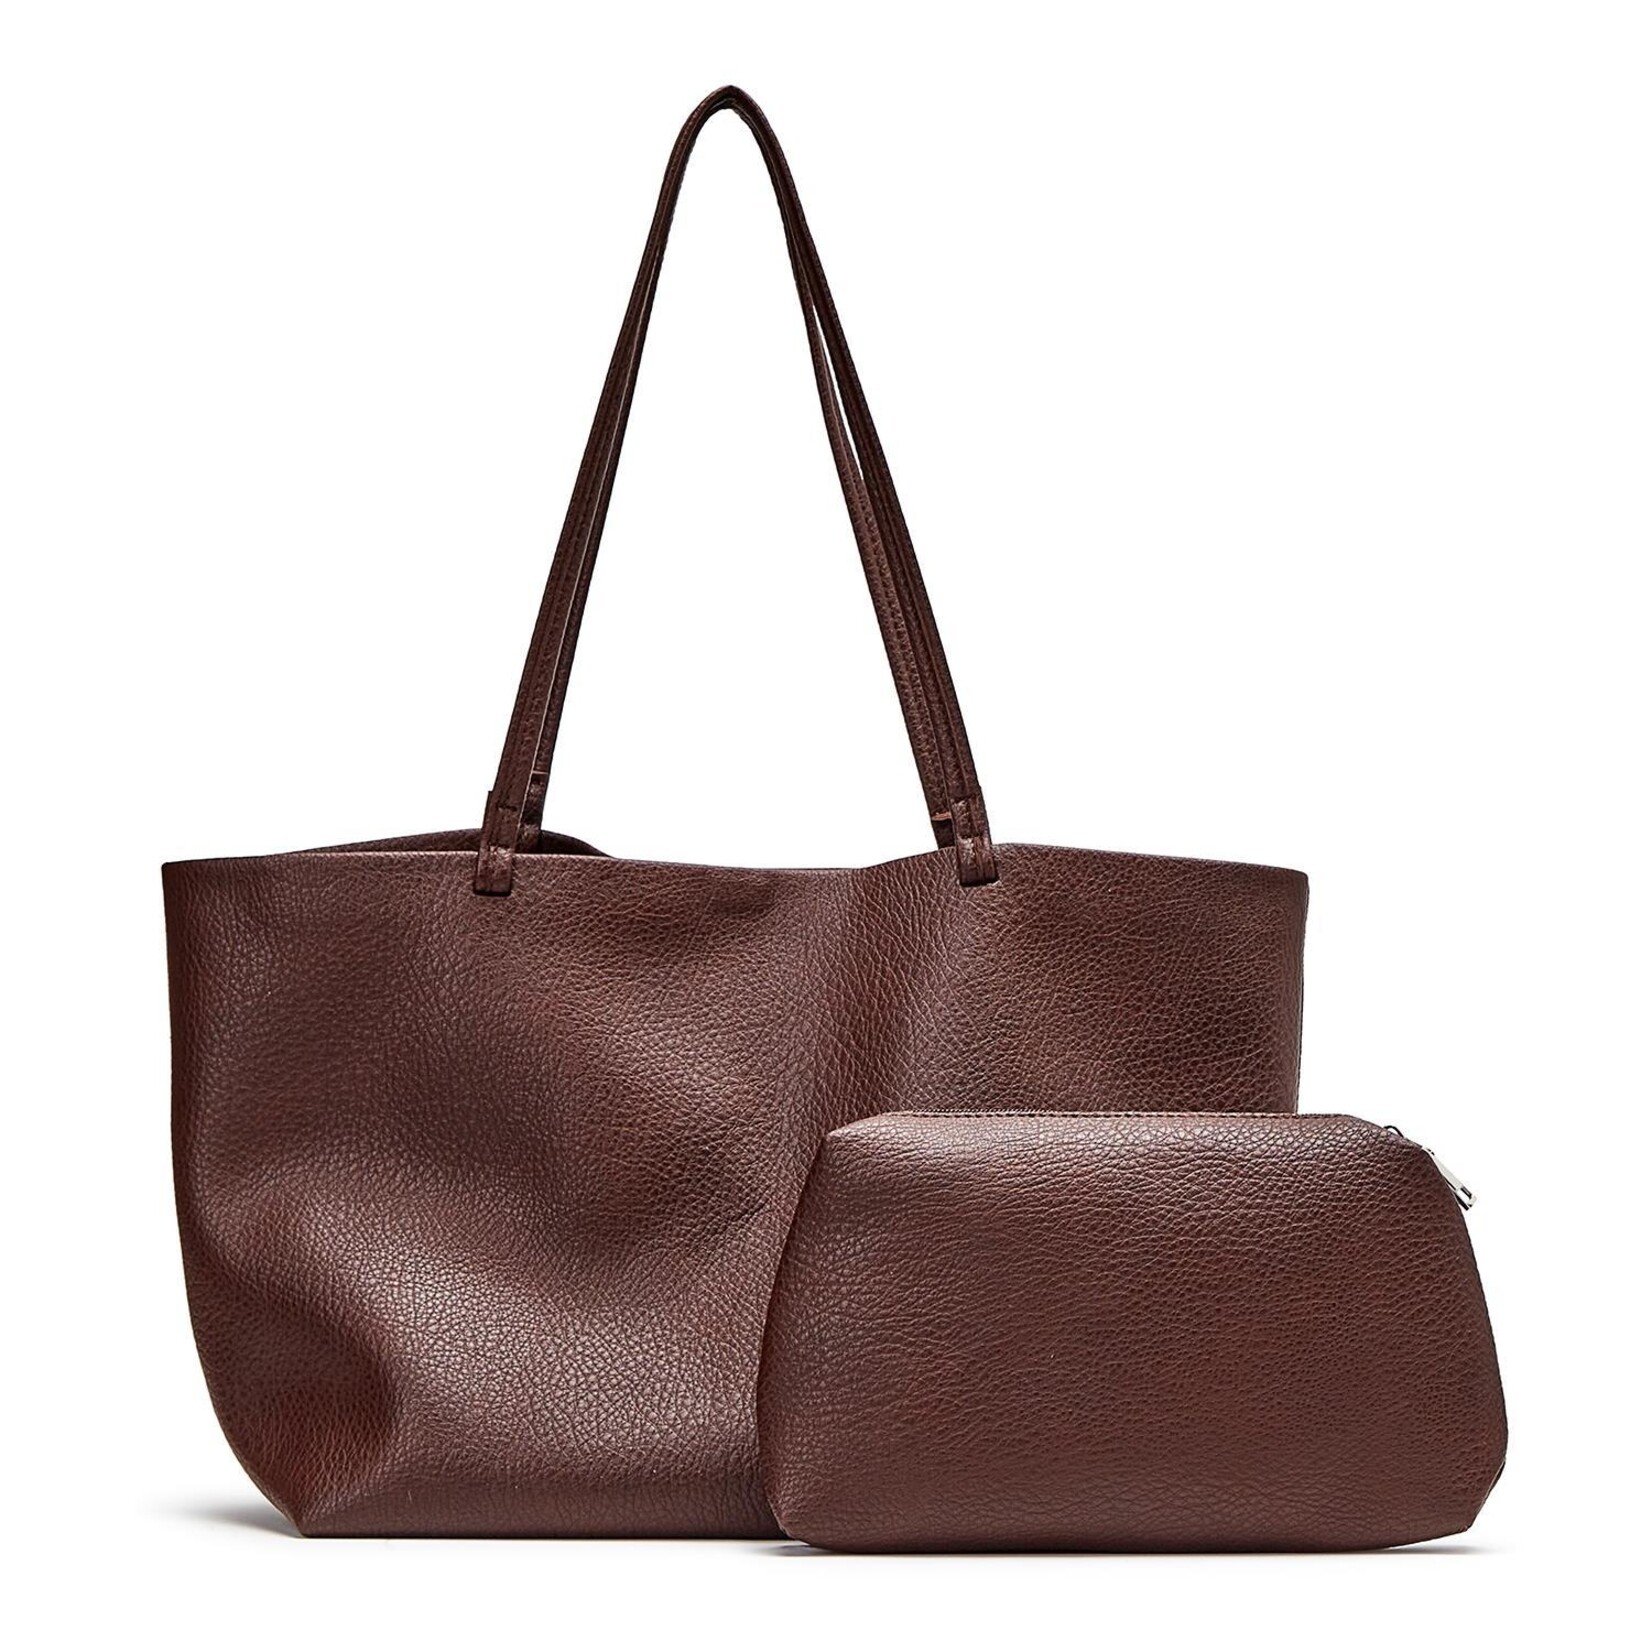 Two's Company Textured Vegan Leather Tote Bag with Coordinating Pouch